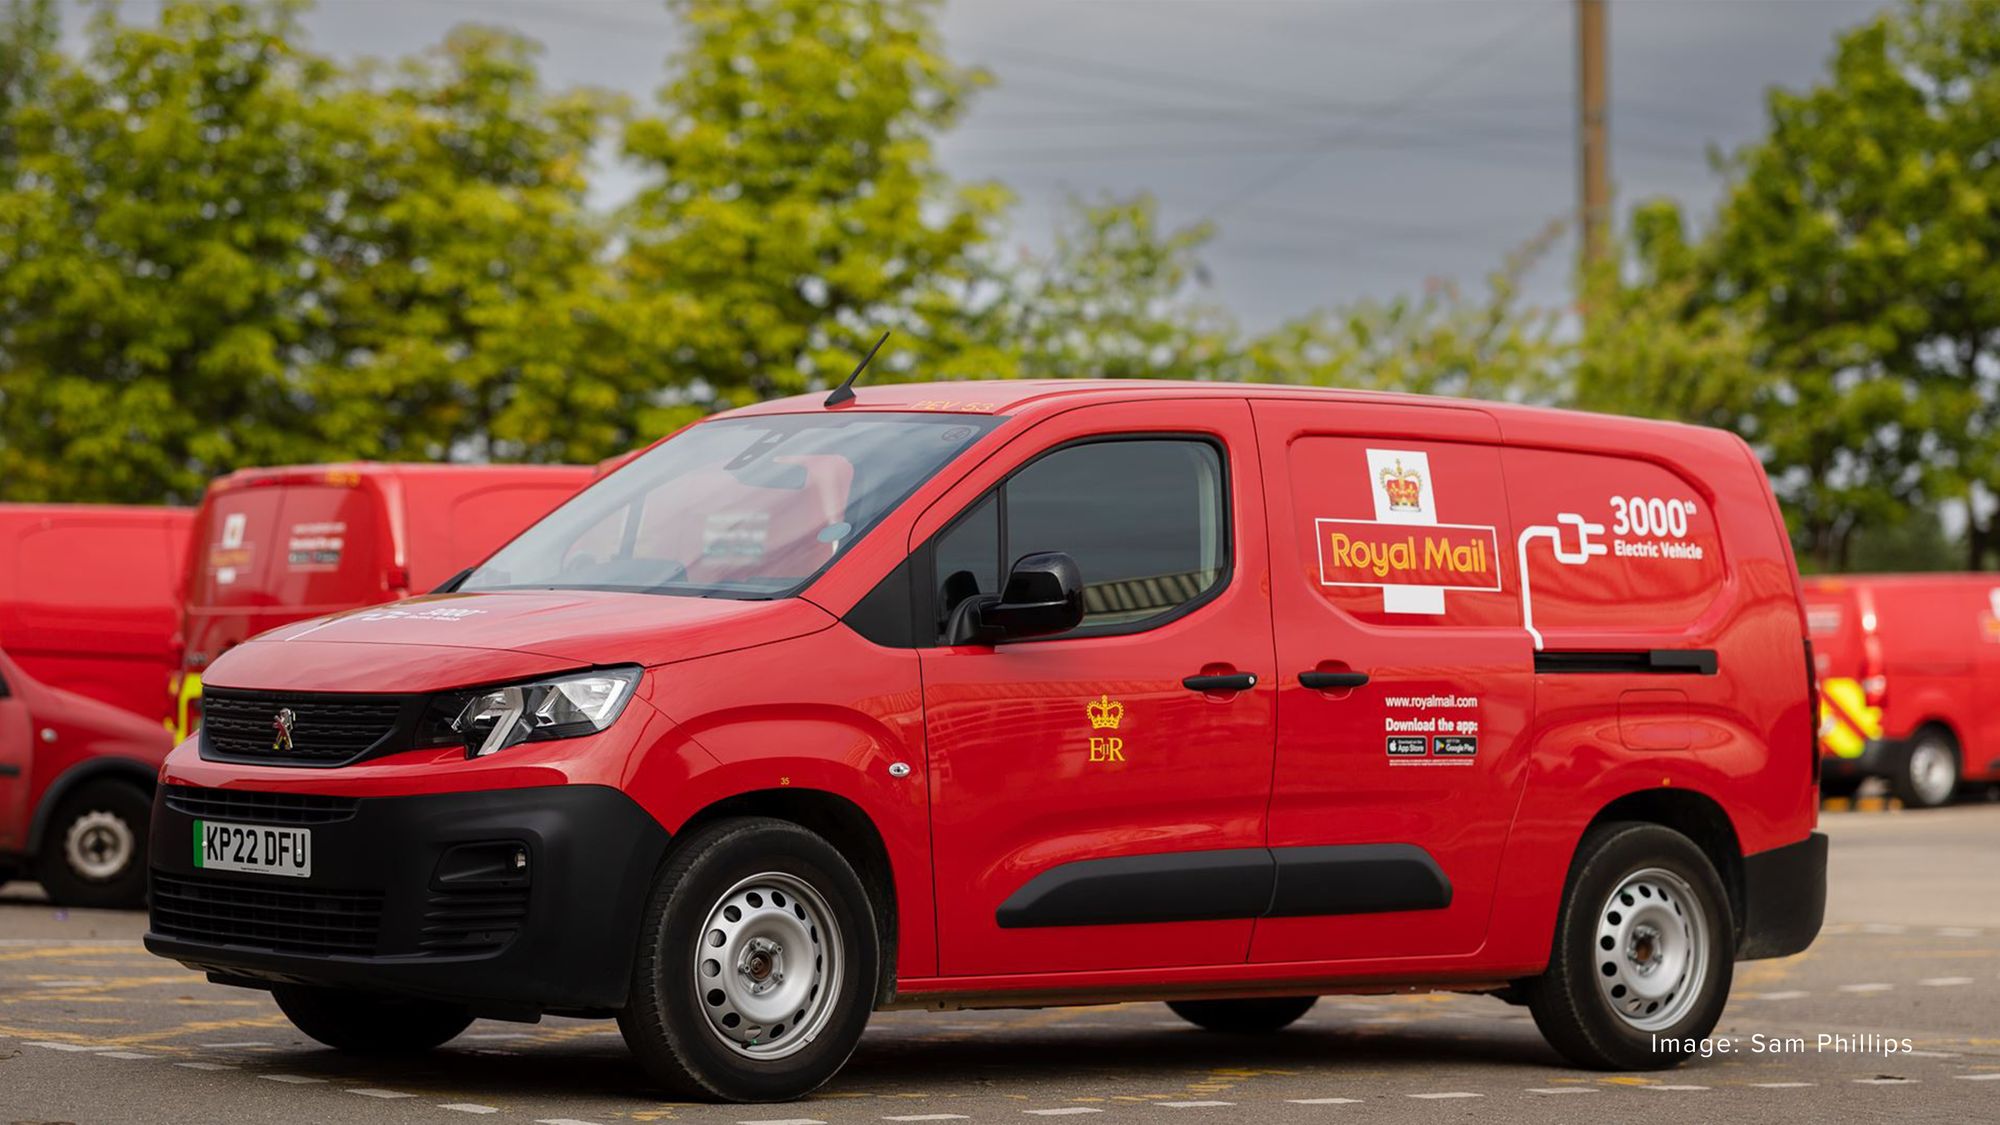 Peugeot To Supply Royal Mail With 2,000 New Electric Vans.